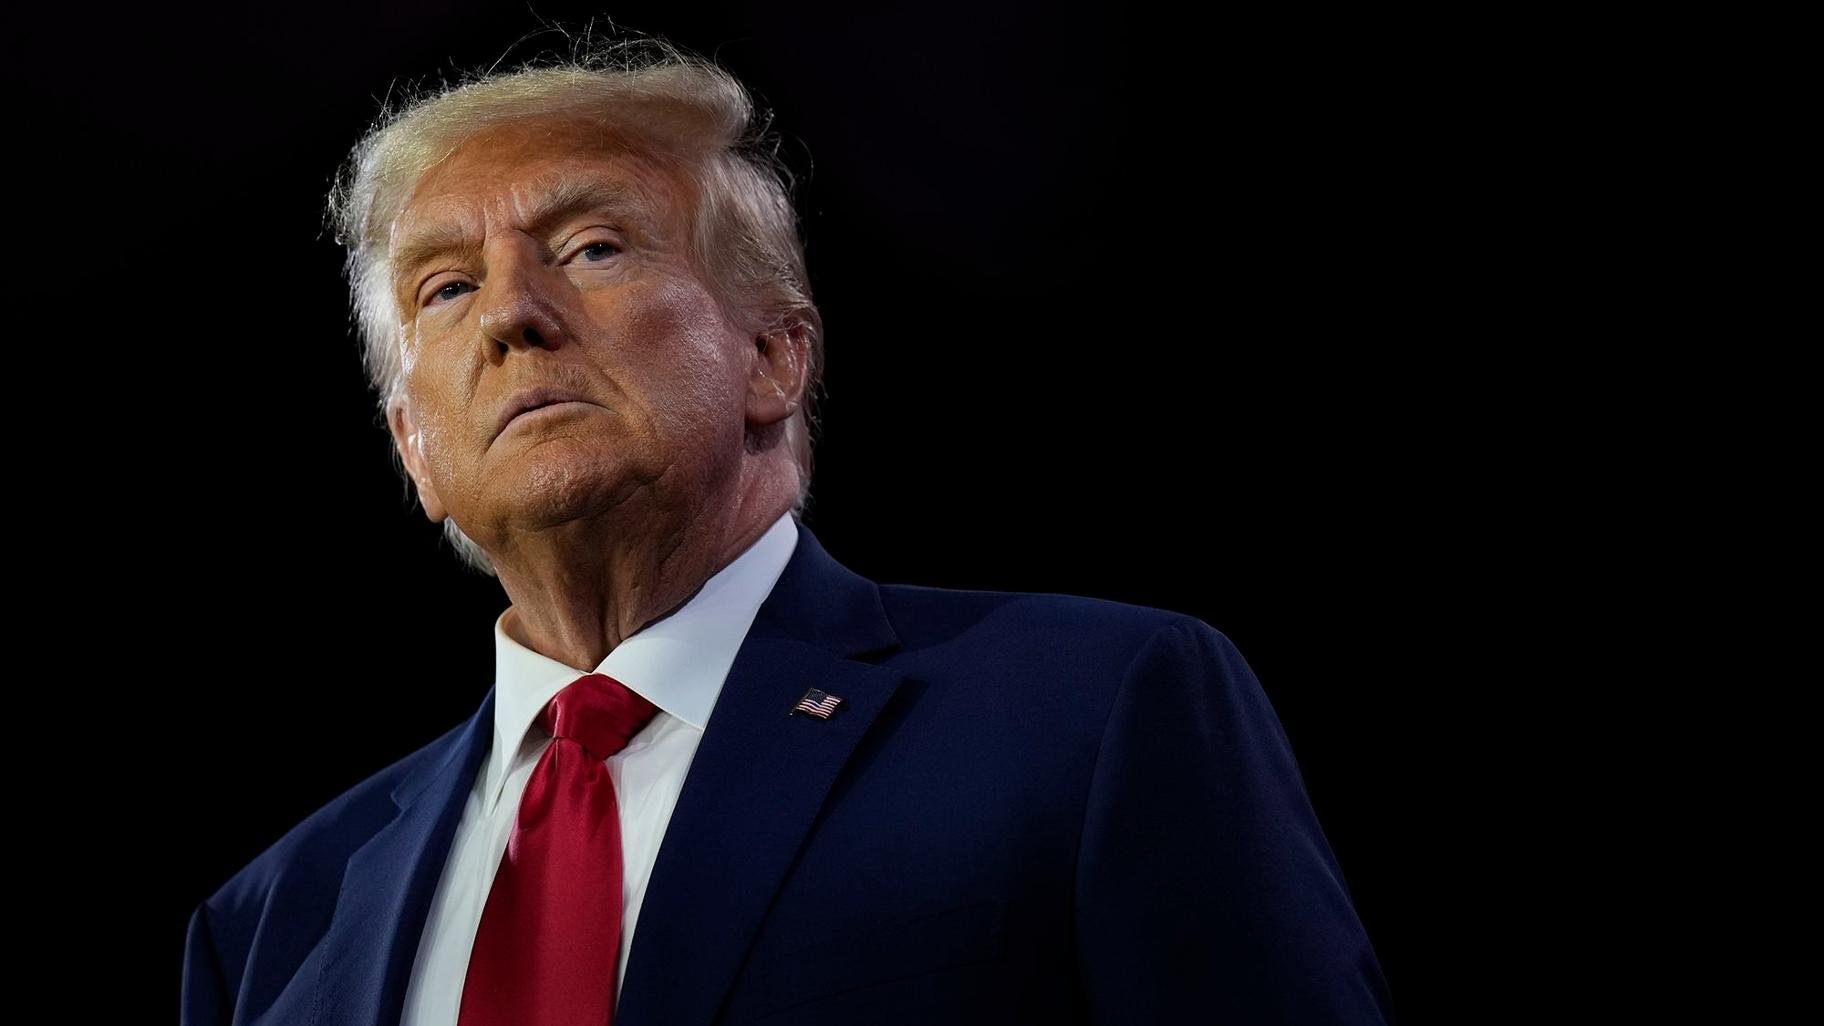 An Atlanta-based grand jury has indicted former President Donald Trump on state charges stemming from his efforts to overturn his 2020 electoral defeat. (Drew Angerer / Getty Images)